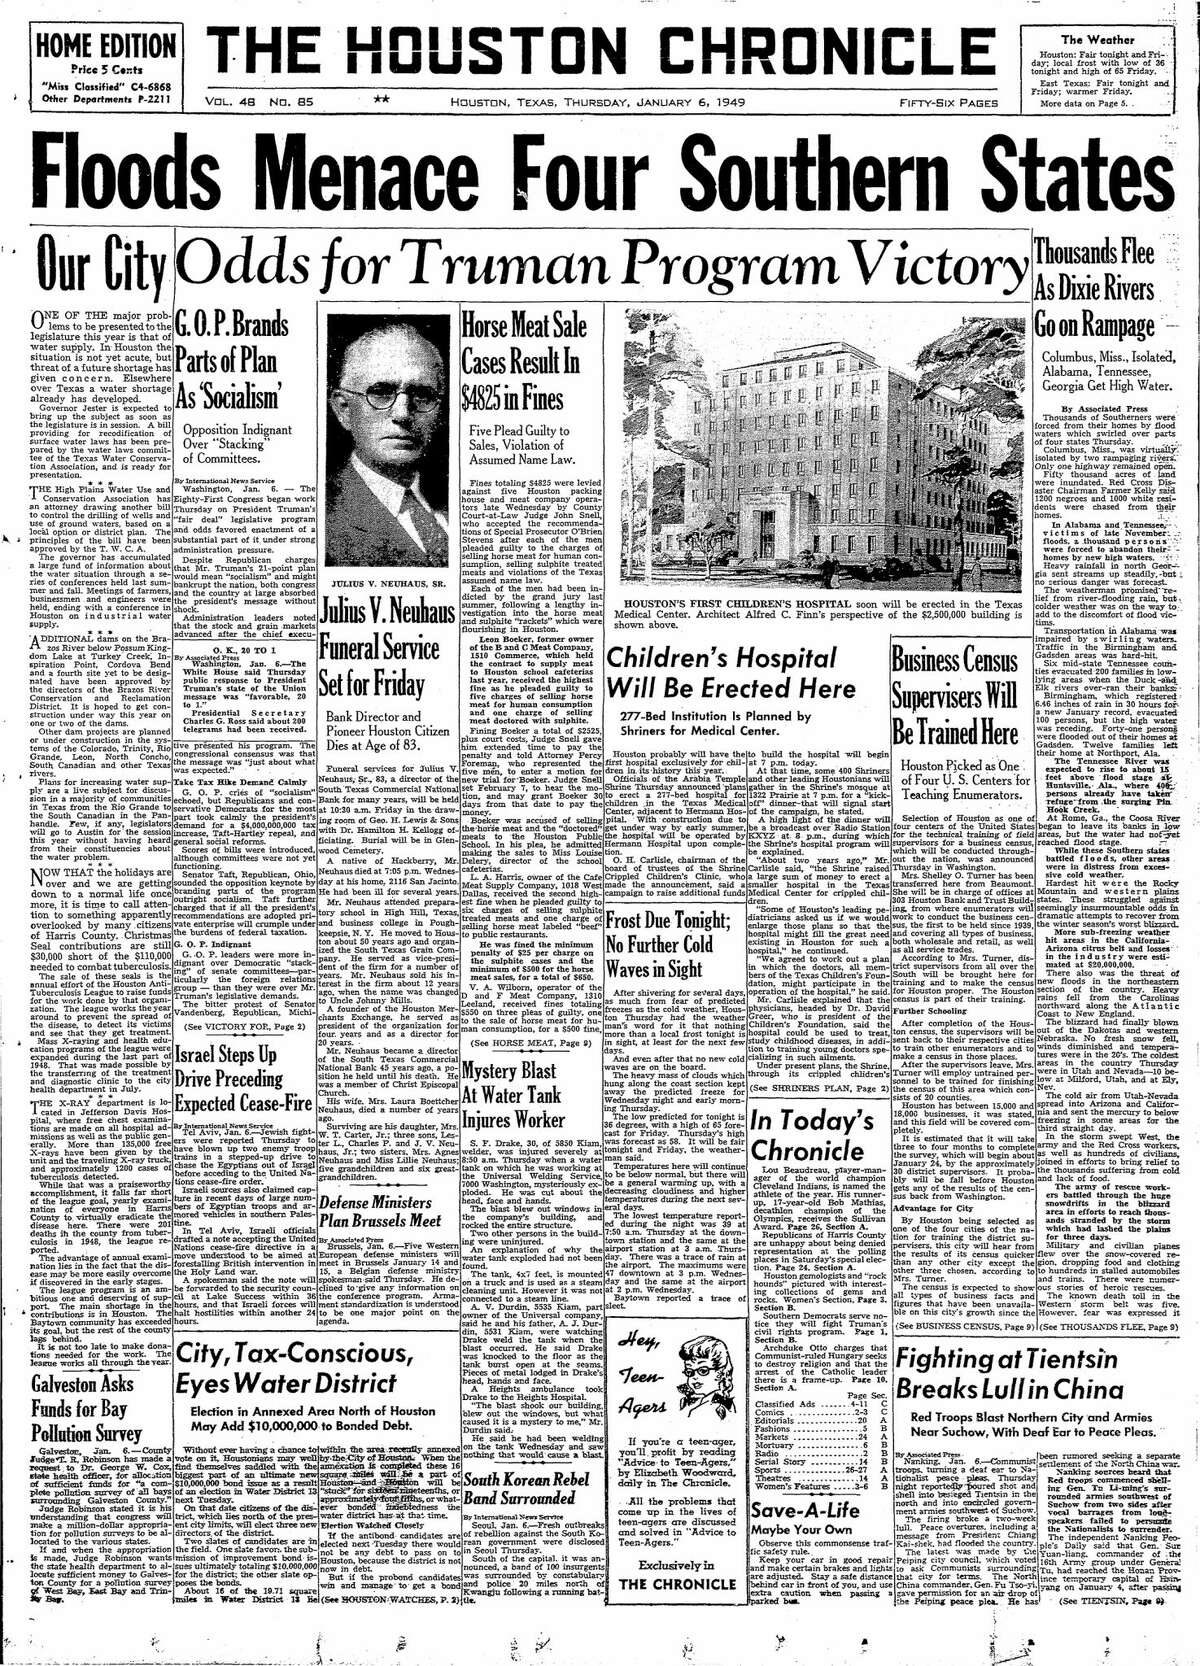 Houston Chronicle front page for Jan. 6, 1949.